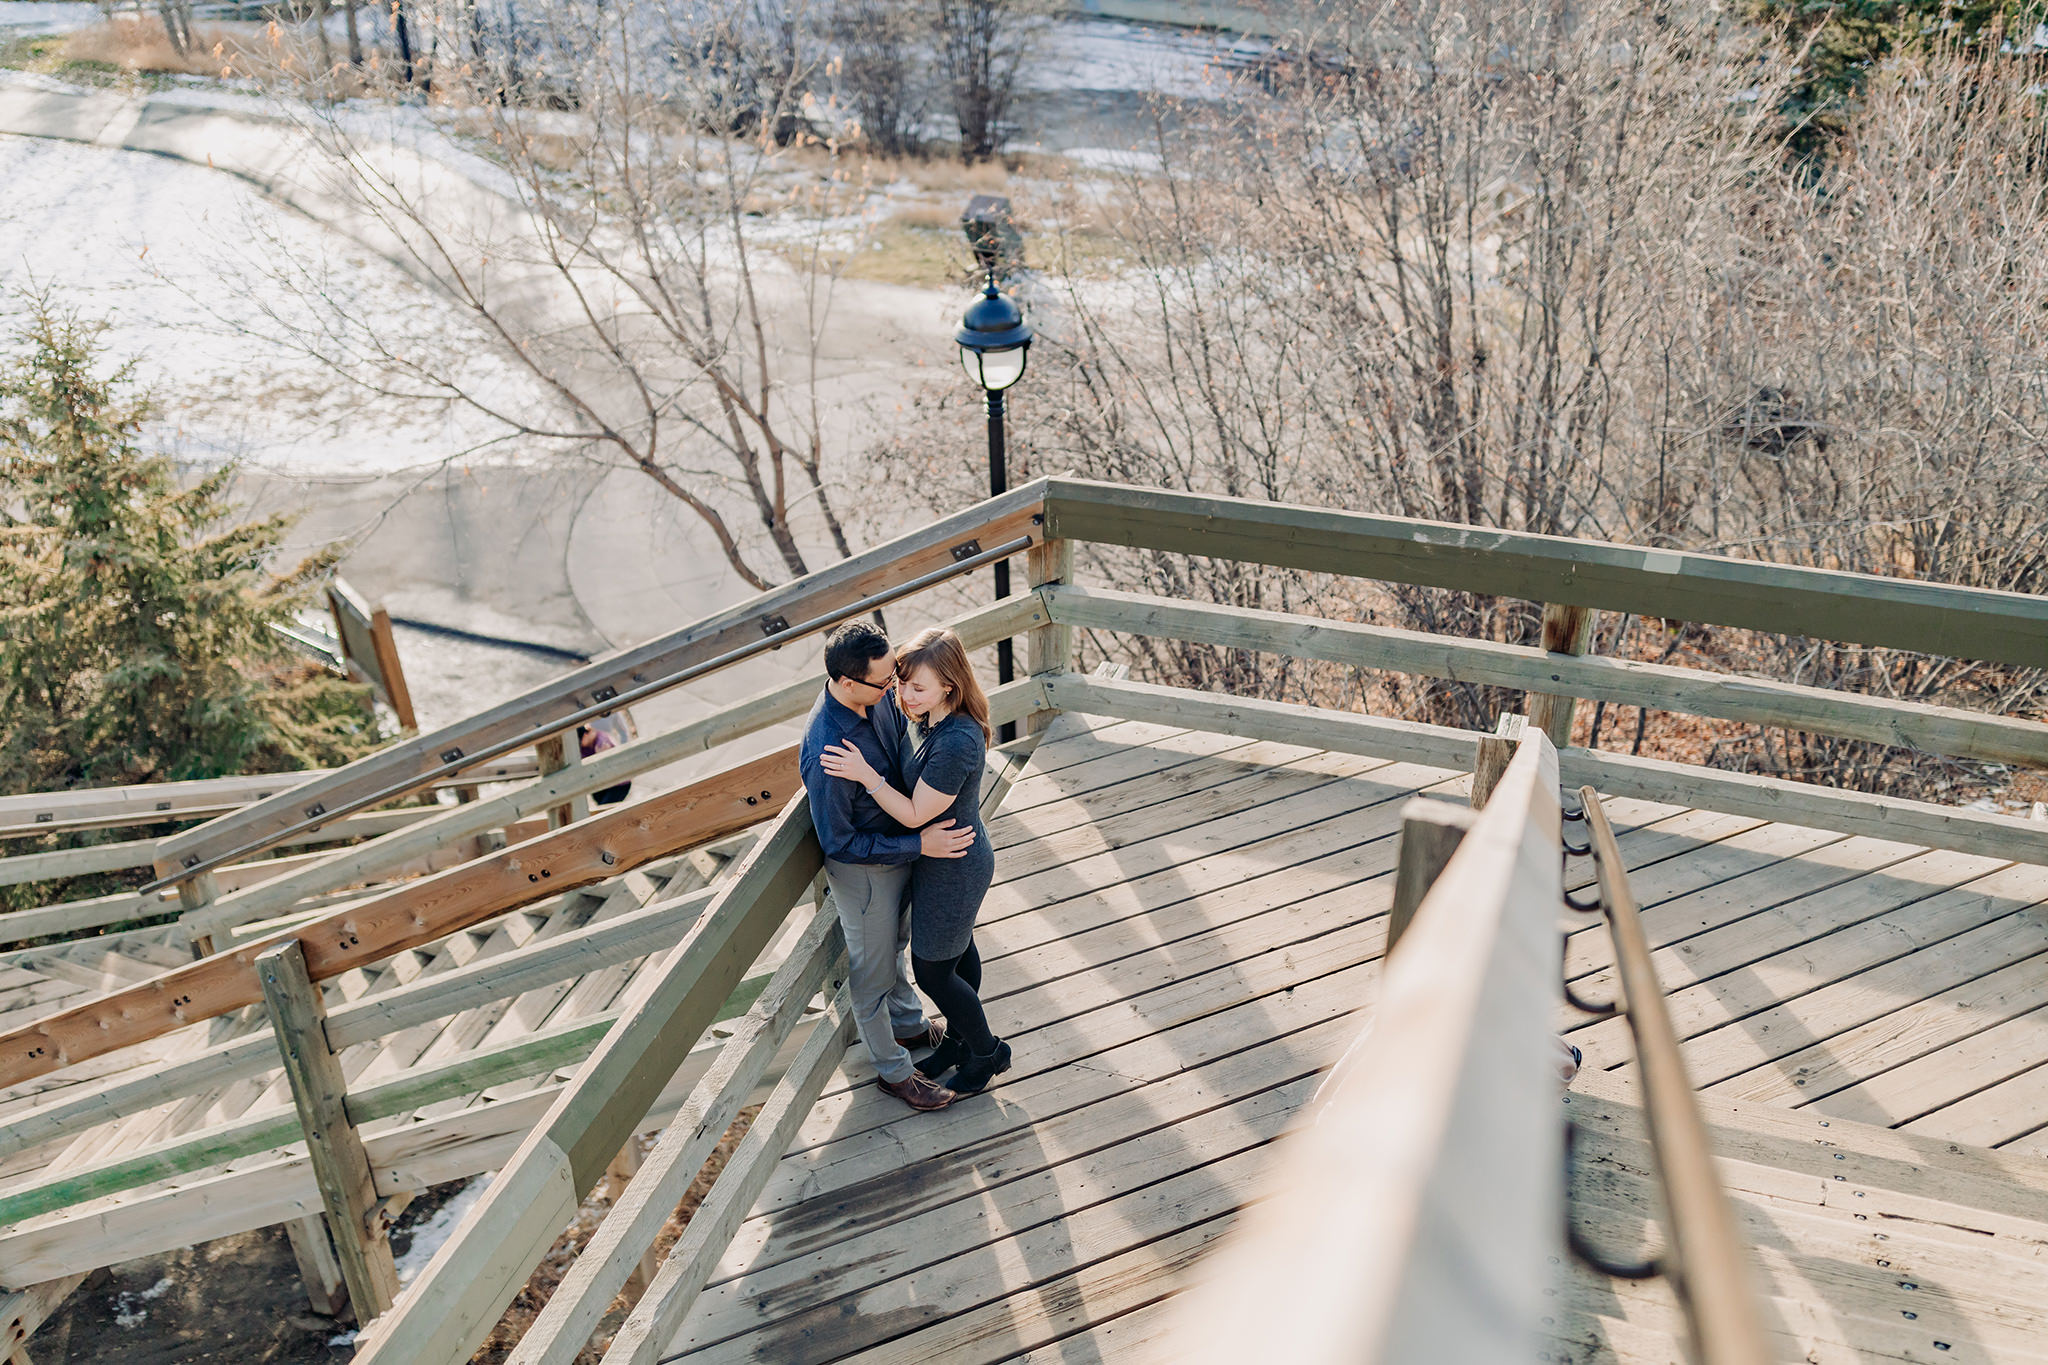 Calgary Engagement session with city skyline